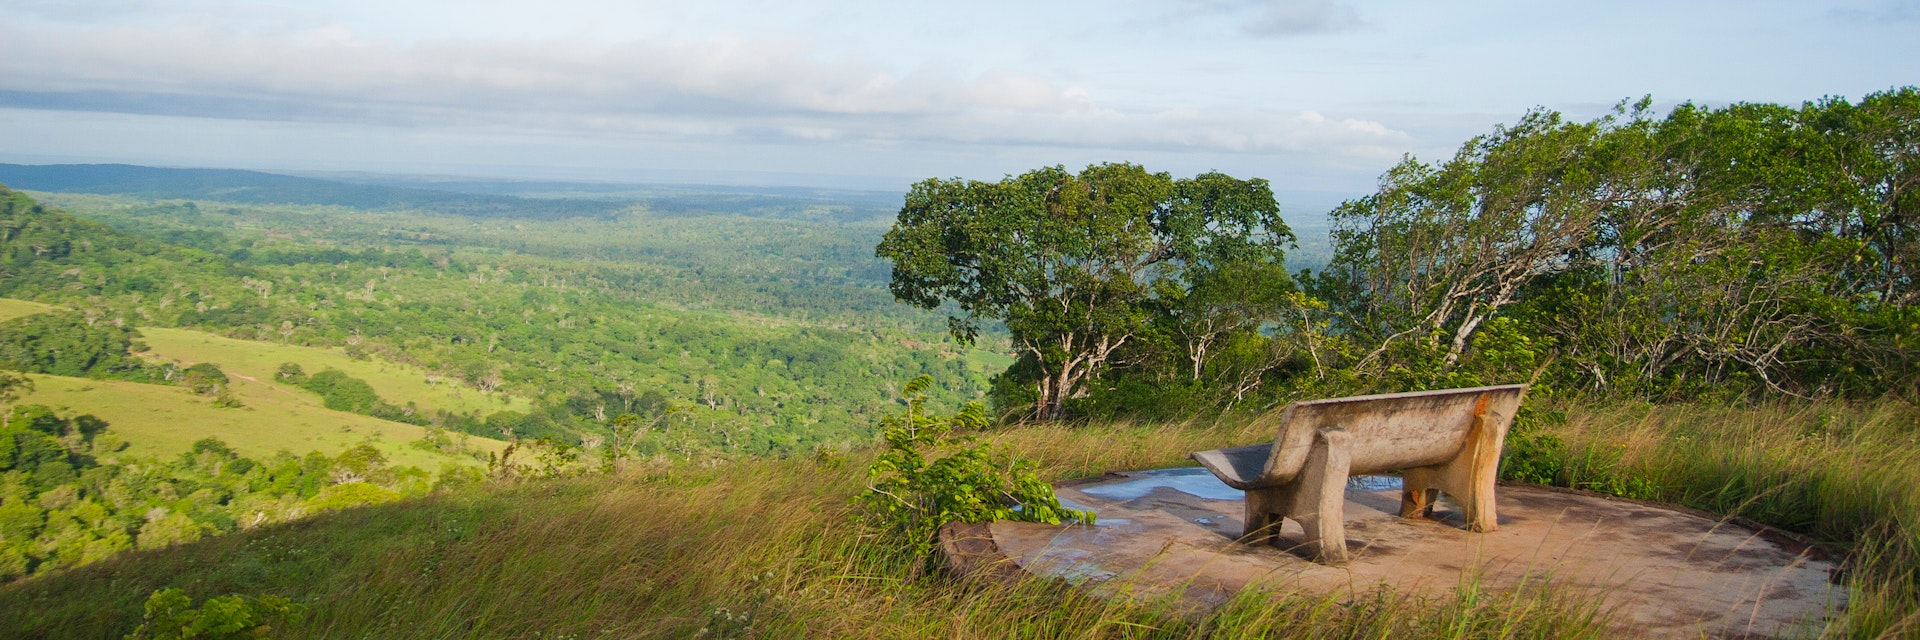 A bench with a view in Shimba Hills National Reserve, Kenya.